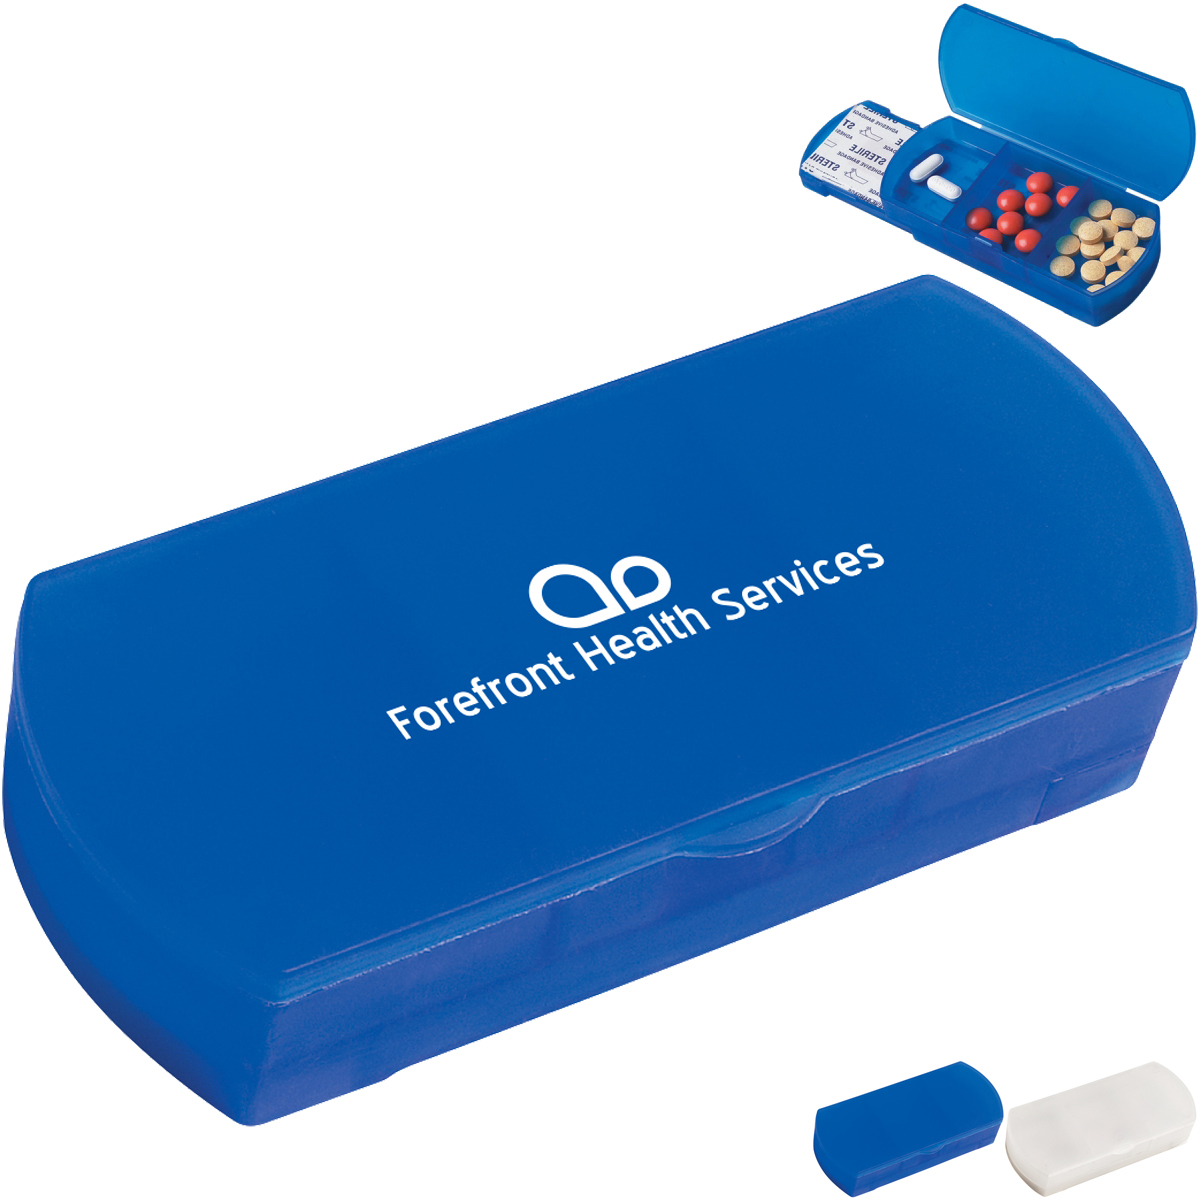 Screw Top Metal Pill Box  Branded Promotional Items and Cool